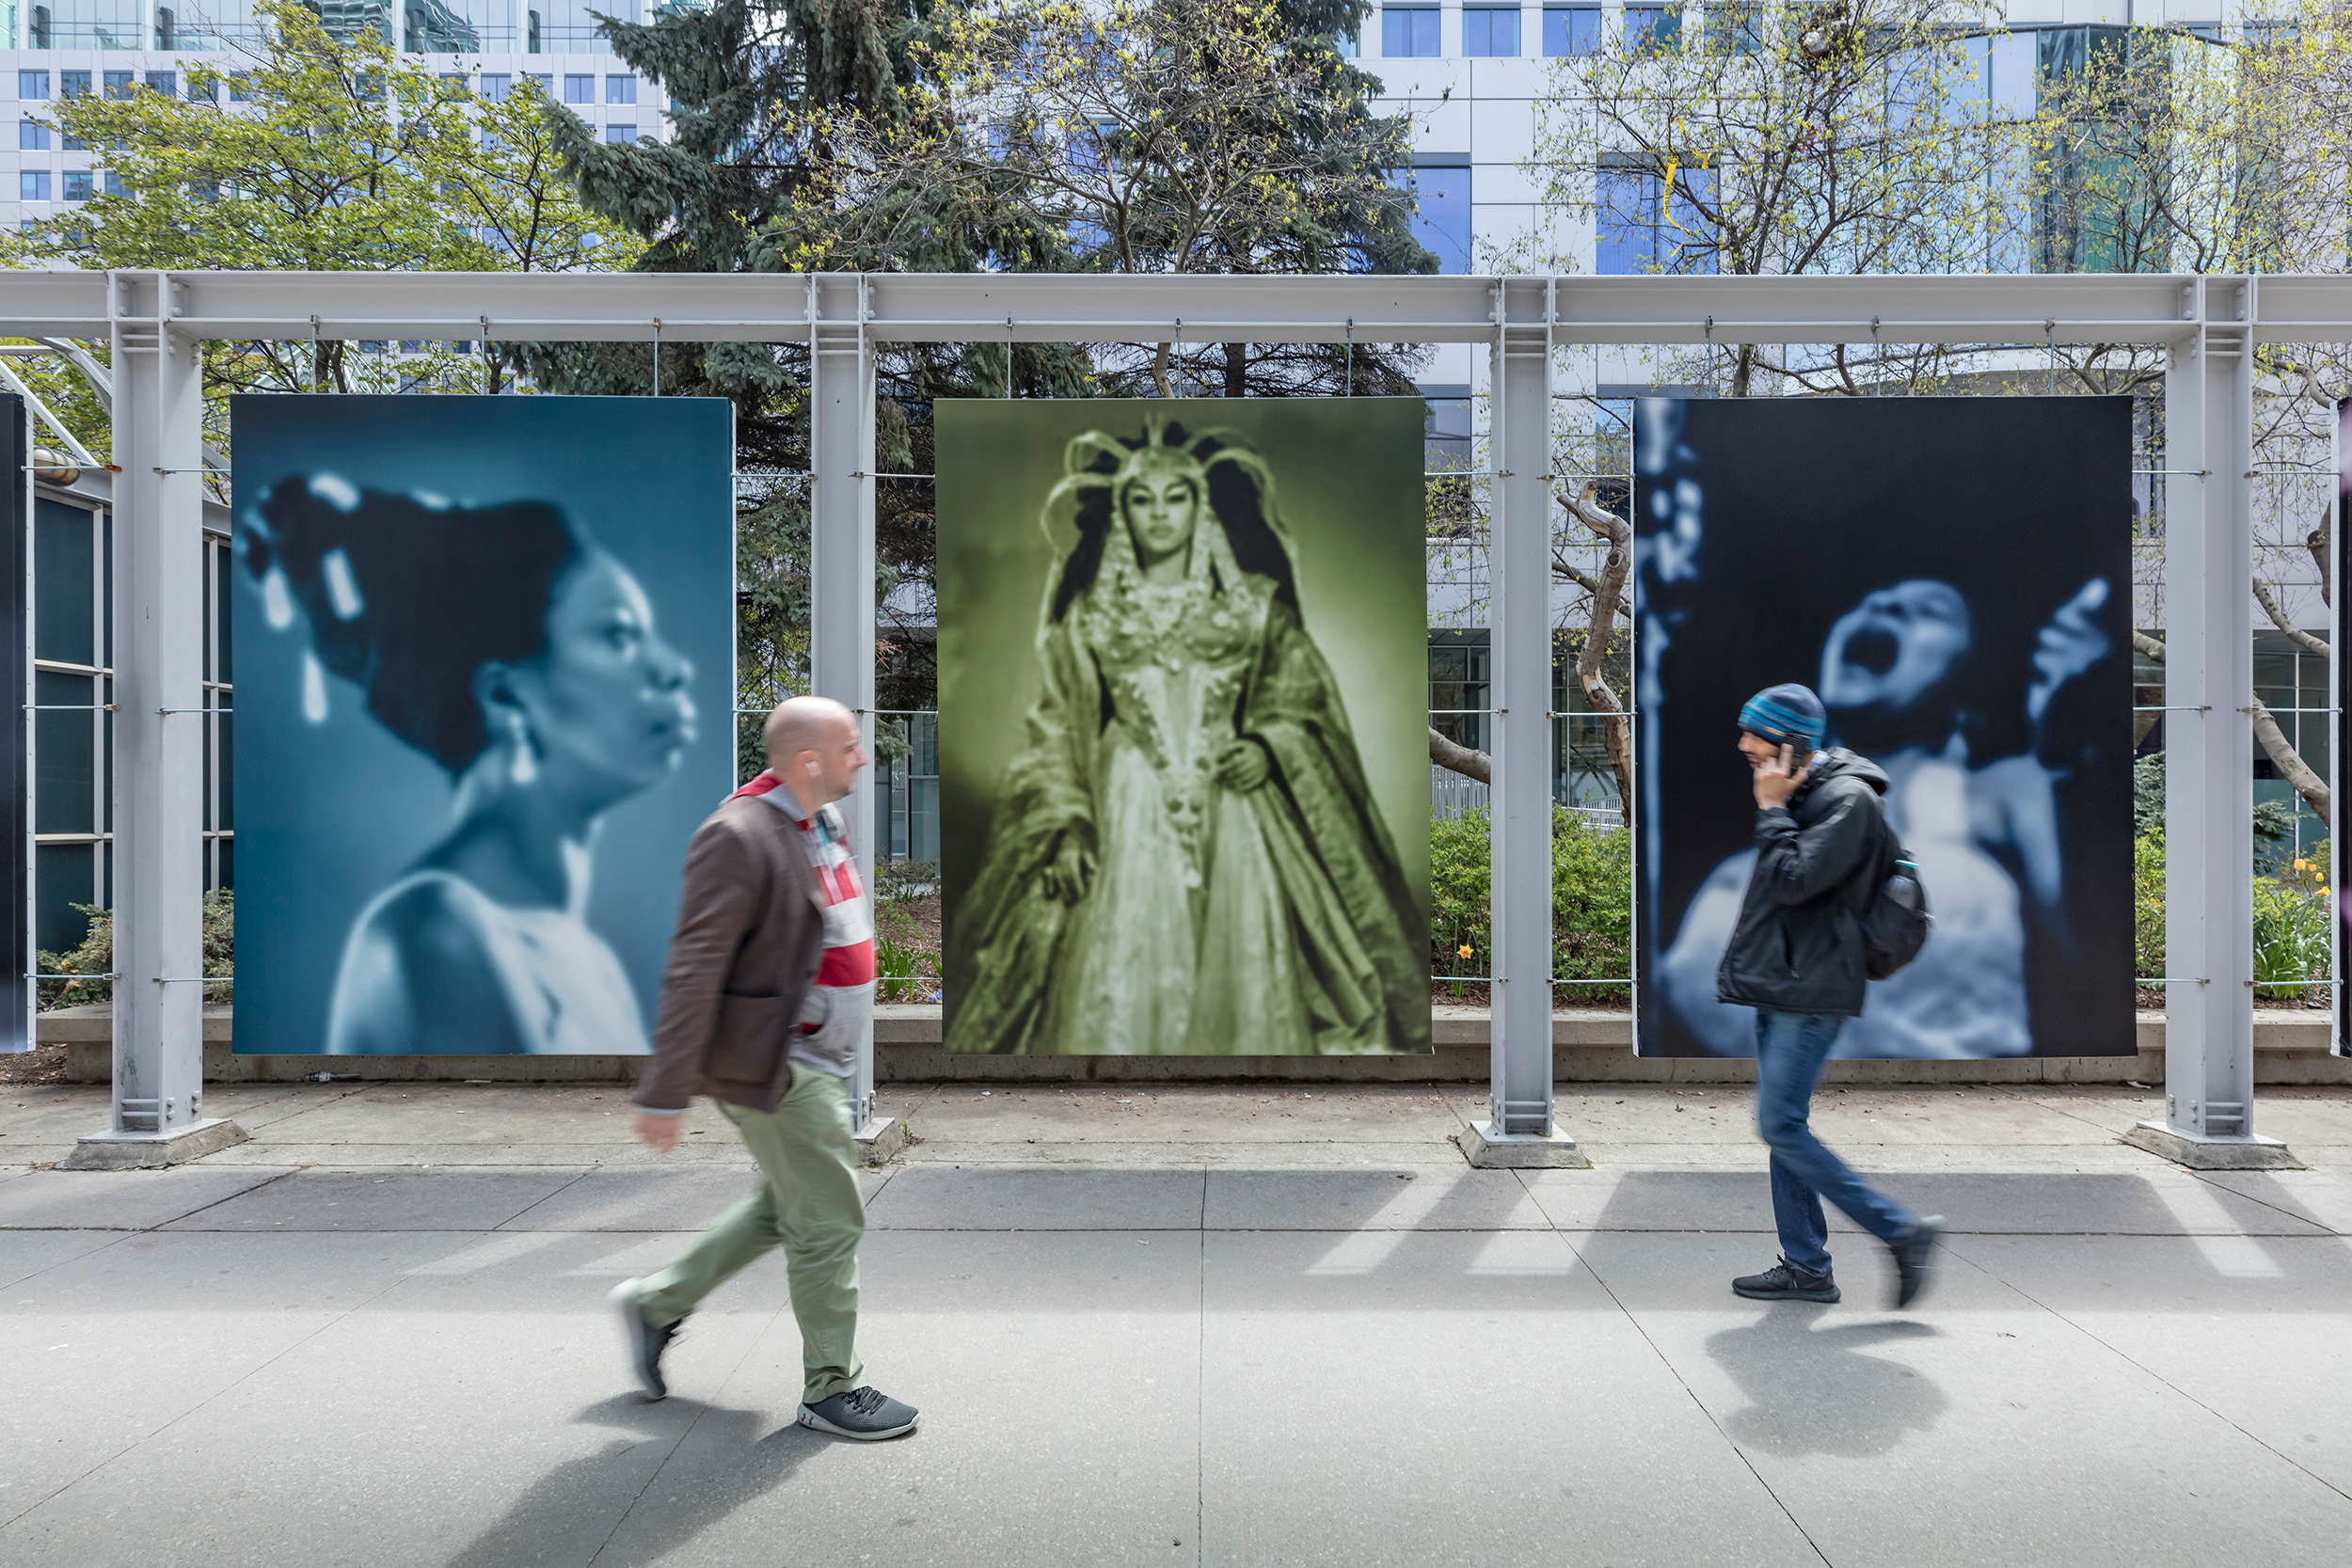     Carrie Mae Weems, Slow Fade to Black, 2010., Public Installation at Metro Hall, King St. W. at
John St., Toronto, April 23–June 4, 2019. Photo: Toni Hafkenscheid. Courtesy Scotiabank
CONTACT Photography Festival, the artist, and Jack Shainman Gallery, New York, NY.

